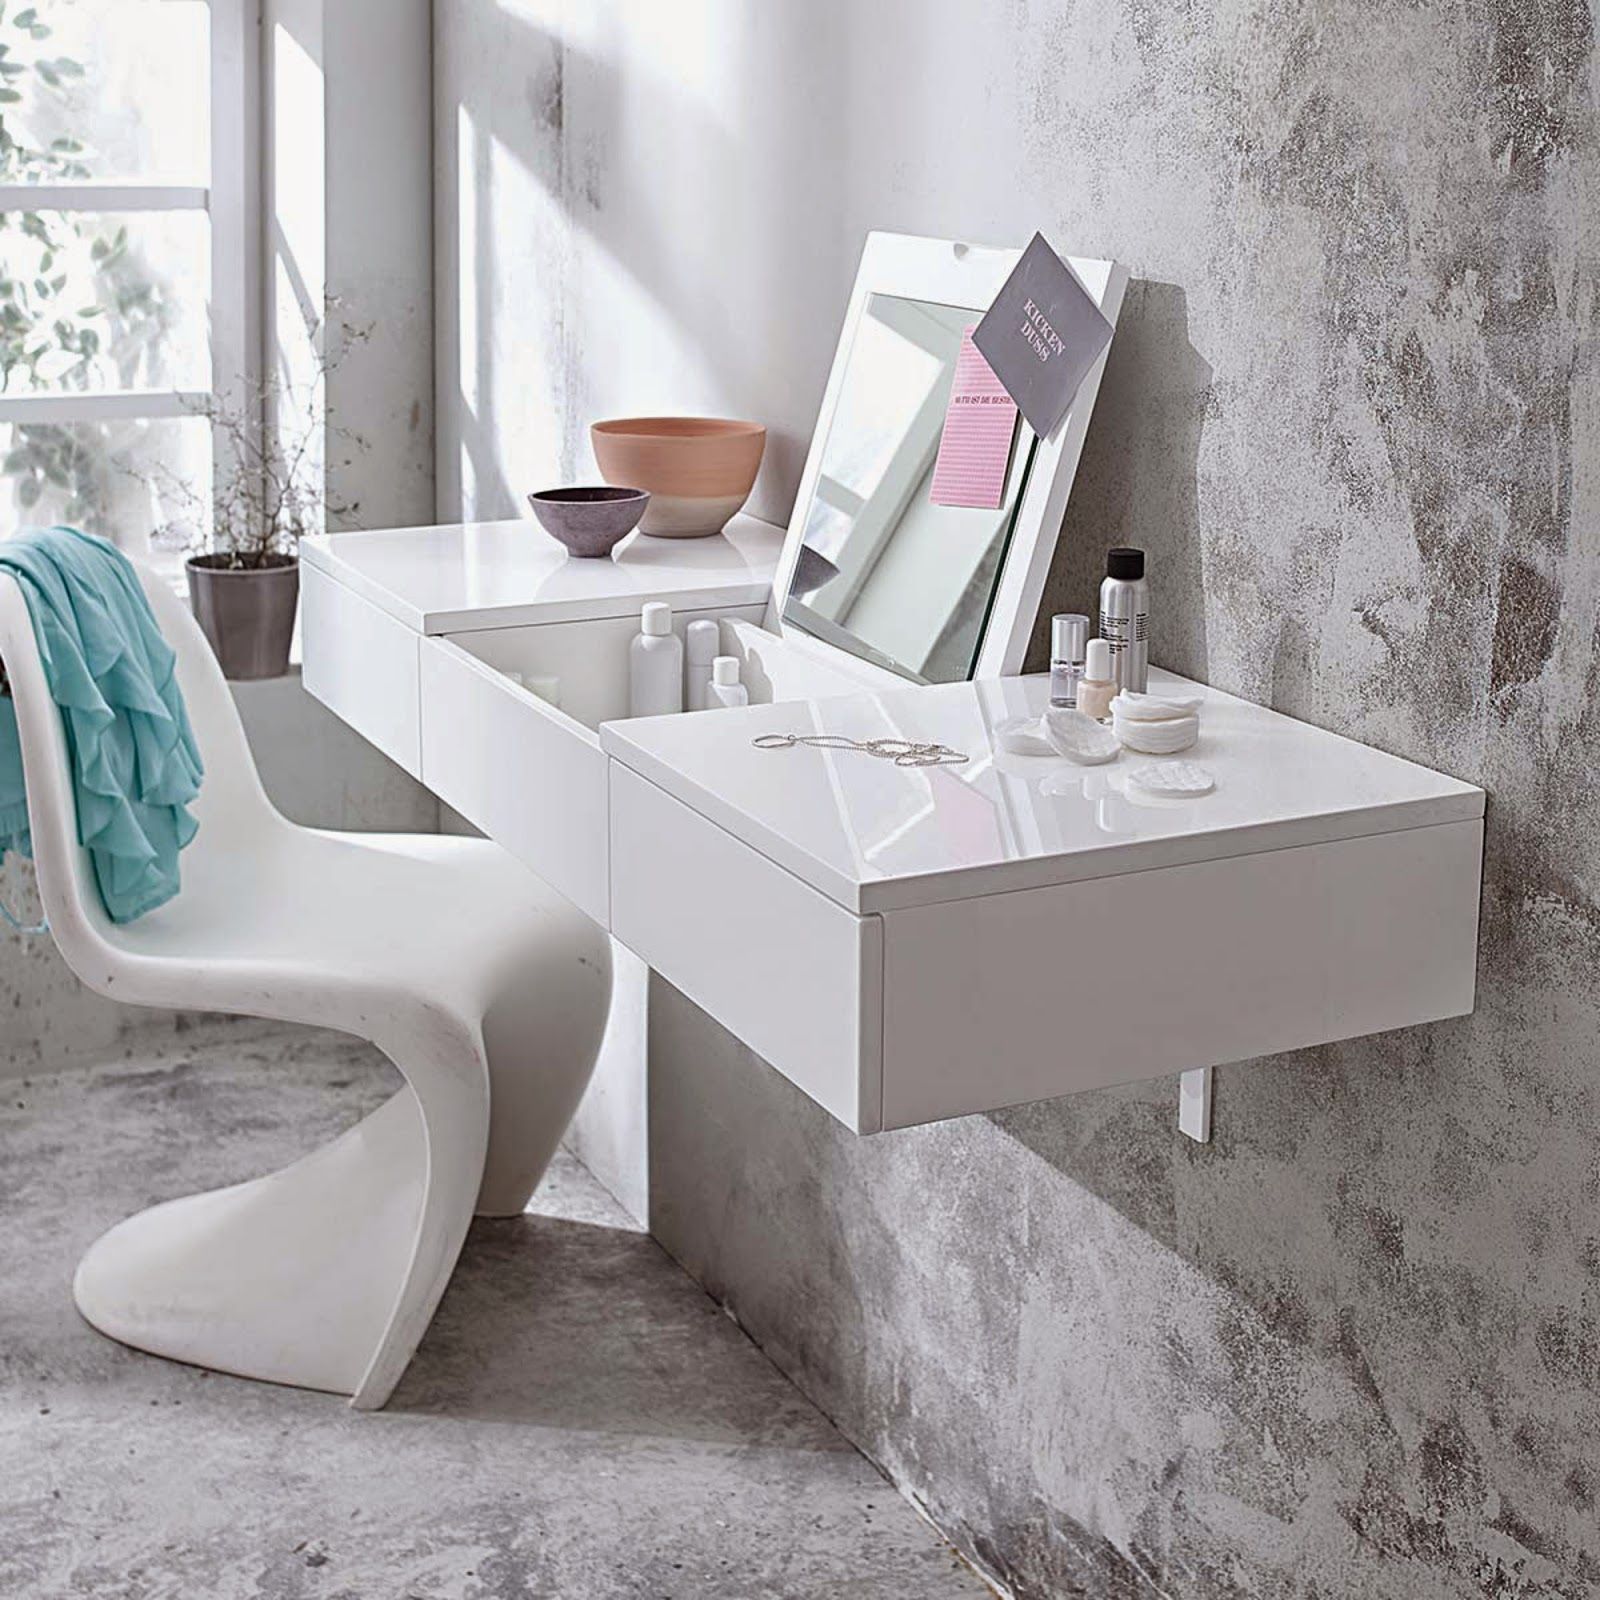 15 Inspirations Decorative Dressing Table Mirrors | Mirror Ideas
